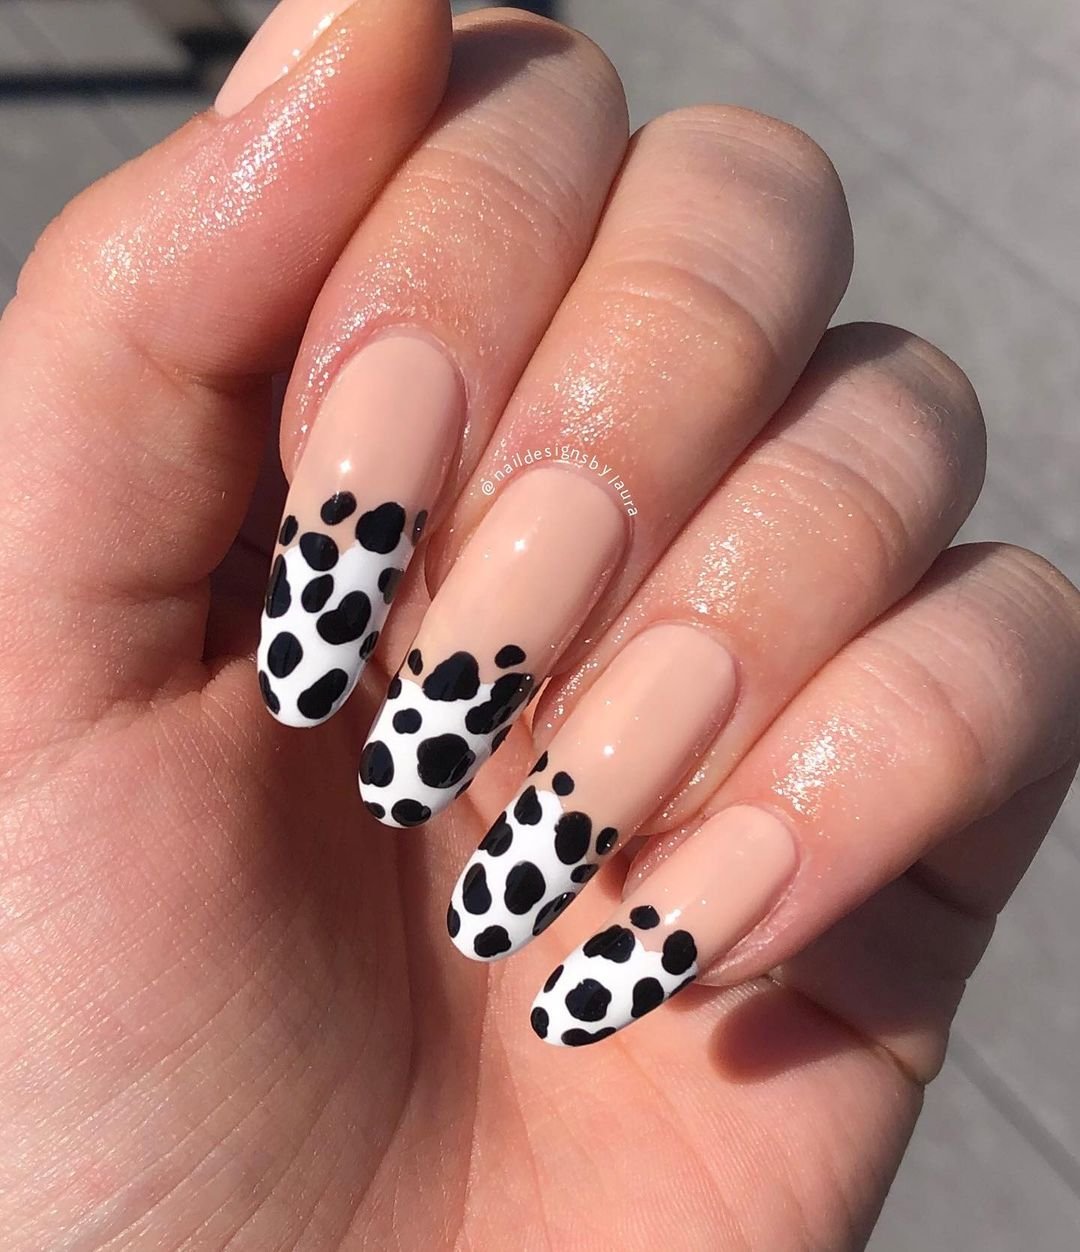 2 - Picture of Black and White Nails